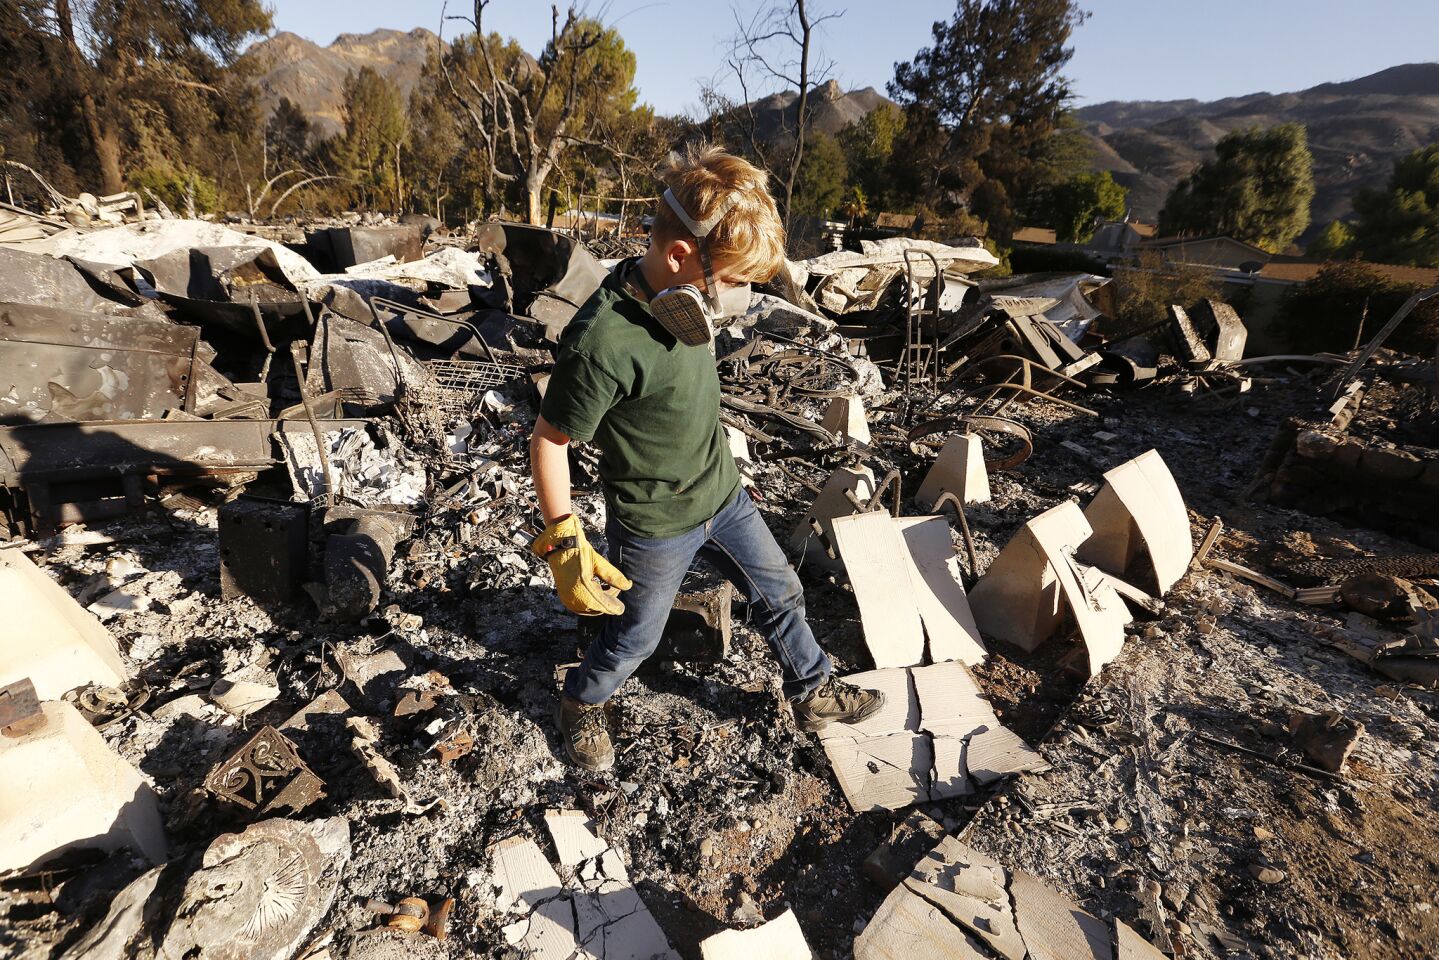 9-year-old Landon Quirk came with his father Trevor Quirk to help search through the rubble of a friend's home in the Seminole Springs mobile home on Mulholland Drive in Agoura Hills.